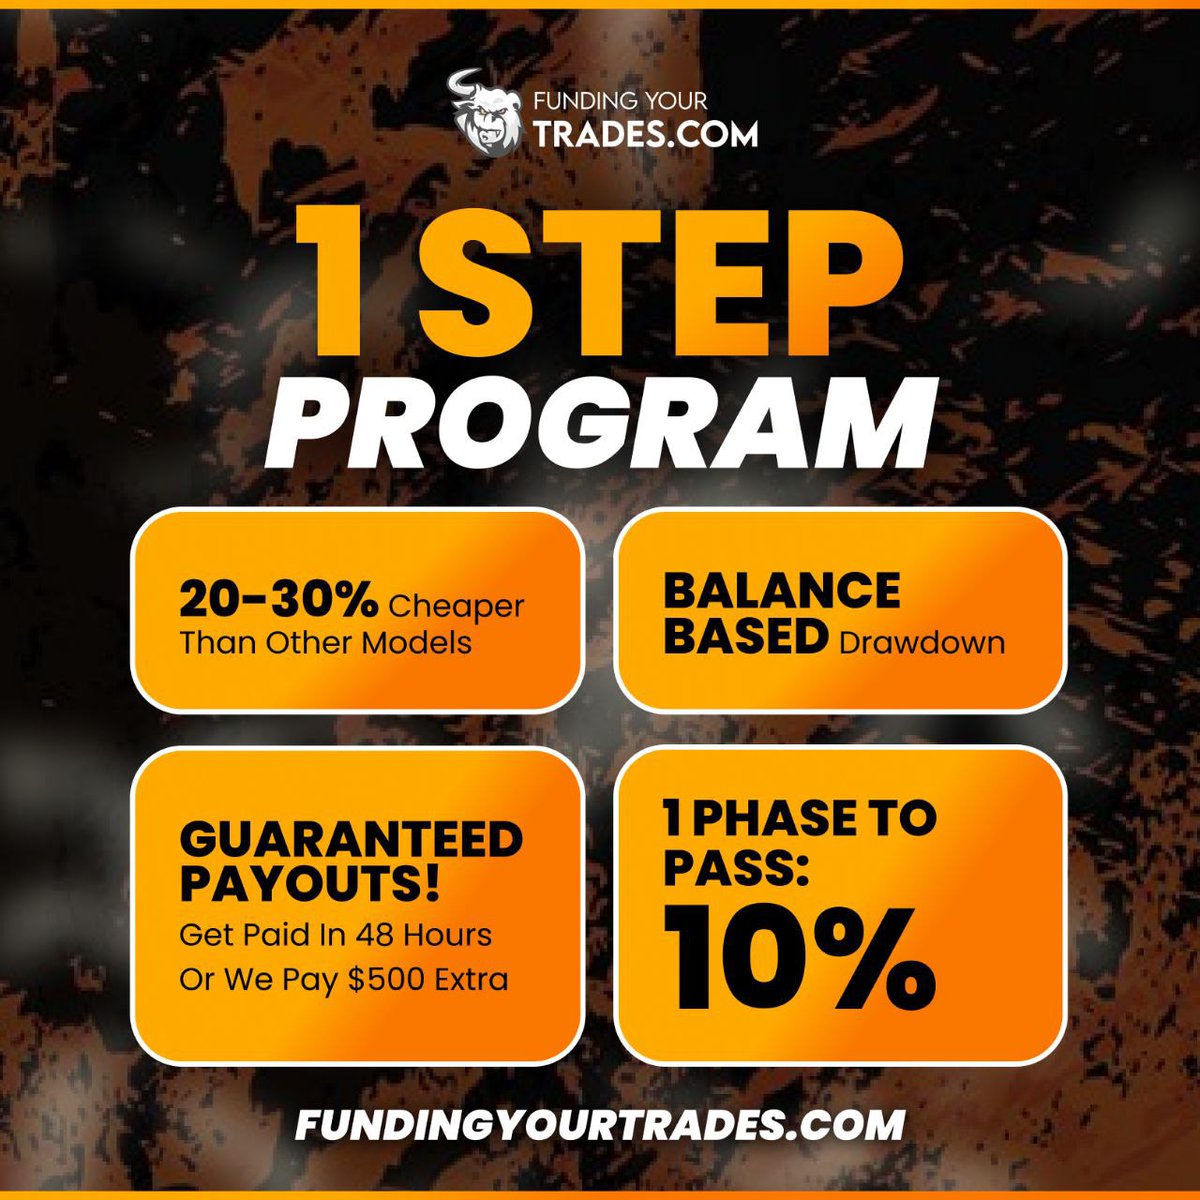 Elevate your trading with FundingYourTrades.com's 1-Step Program! Enjoy slashed rates, guaranteed payouts within 48 hours, and a safety net with our Balance-Based Drawdown system. Just pass one phase at 10% to start trading confidently. Visit us now for financial freedom!